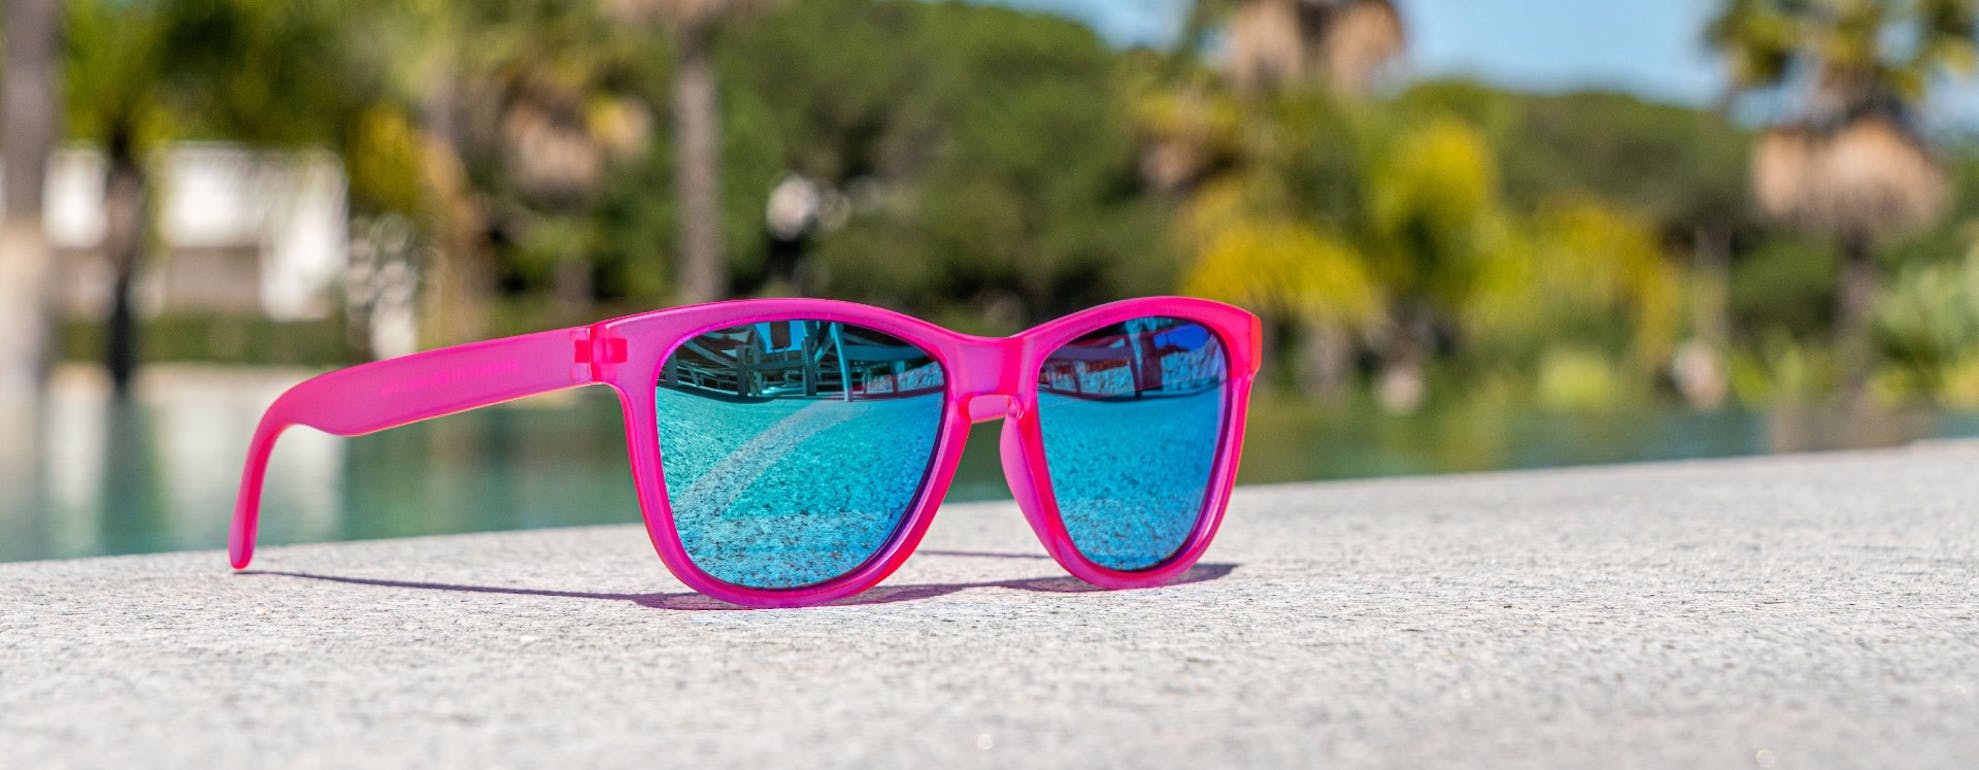 FIRST LOOK: The Higher State Run Sunglasses Range